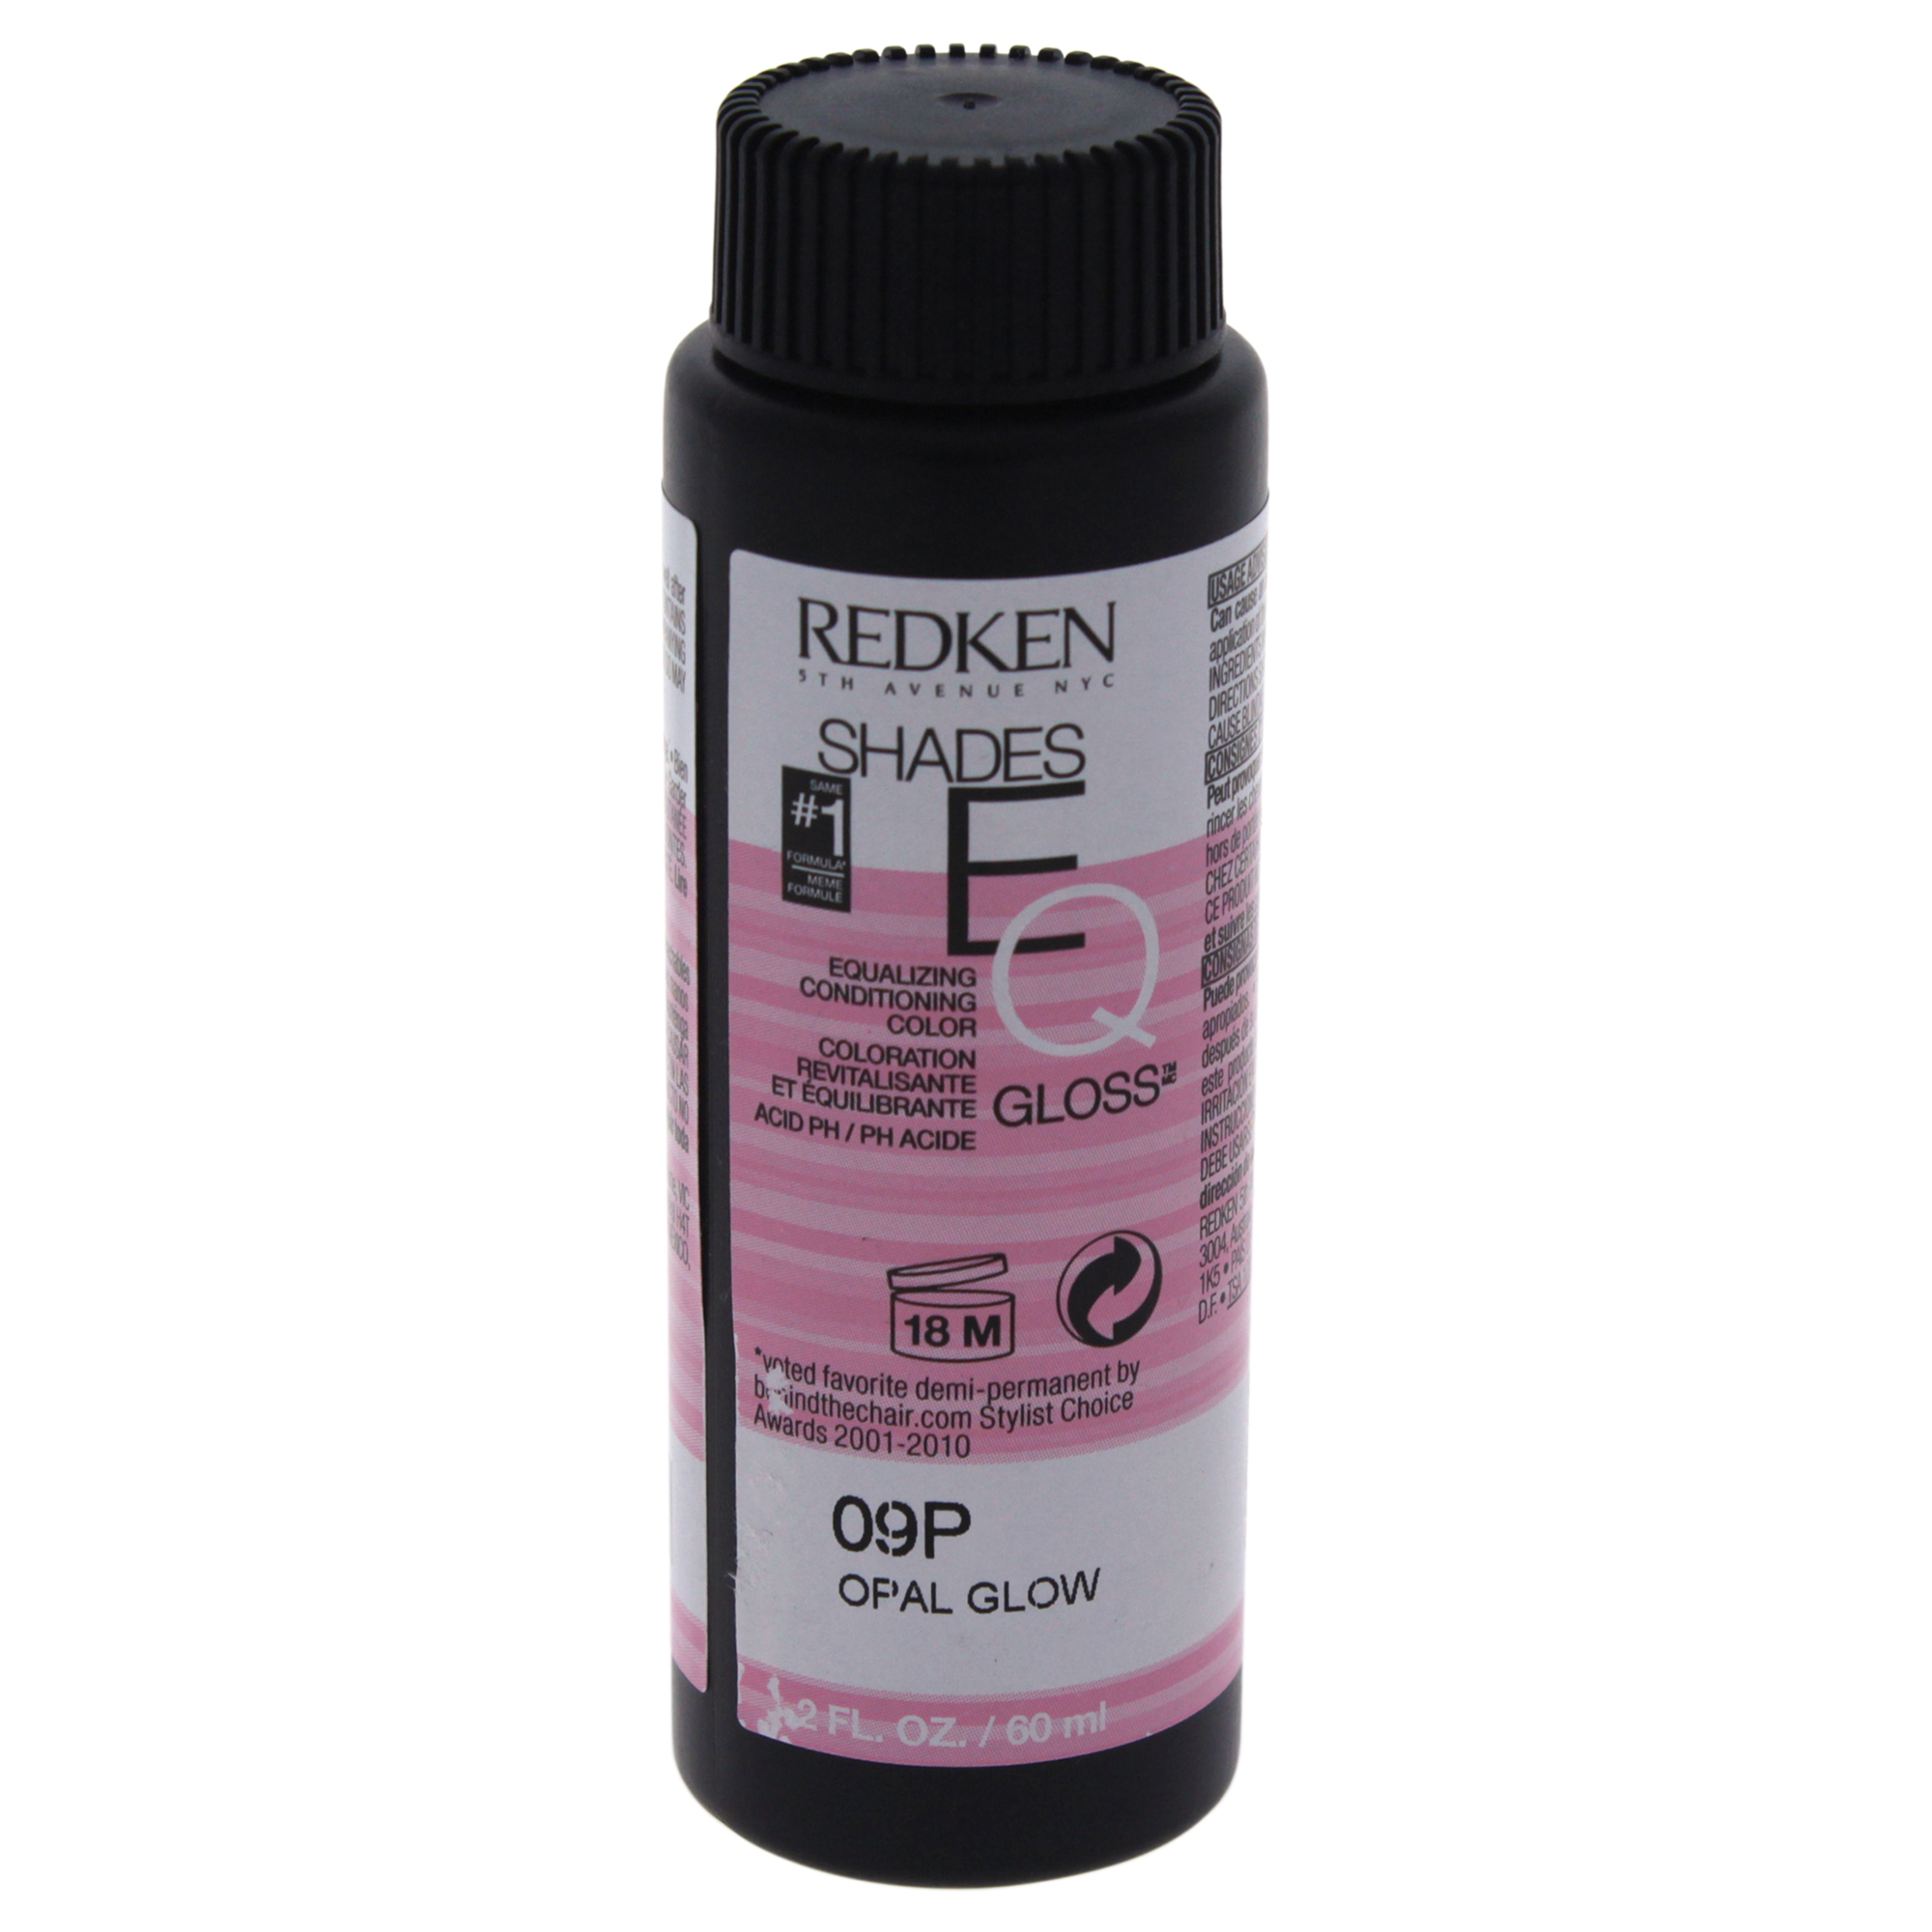 Redken Shades EQ Color Gloss 09P - Opal Glow - 2 oz Hair Color - image 1 of 2